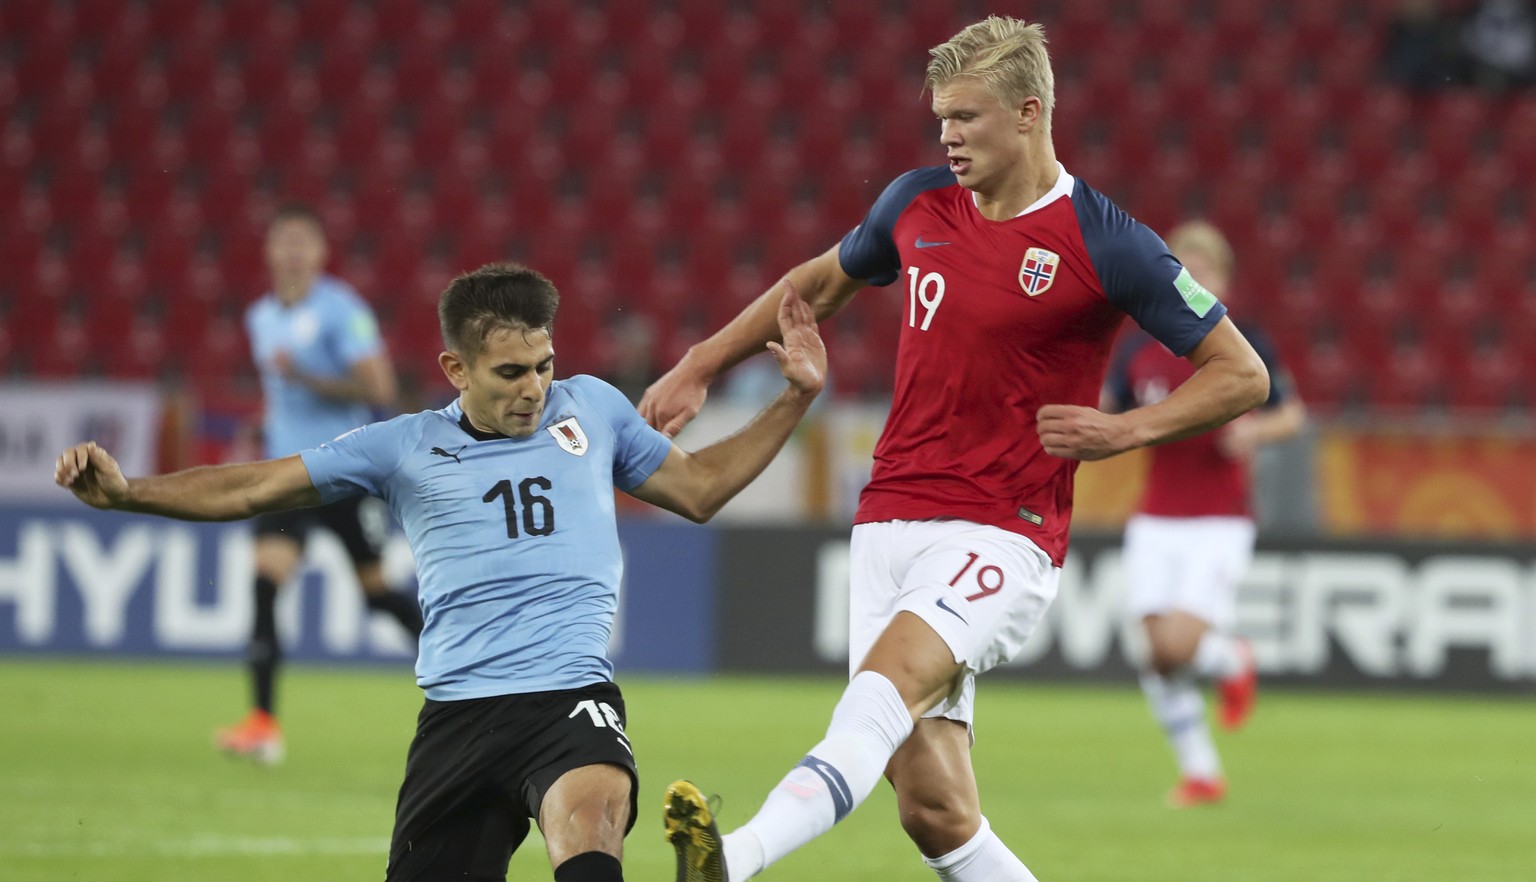 Uruguay&#039;s Nicolas Acevedo, left, and Norway&#039;s Erling Haland vie for the ball during the Group C U20 World Cup soccer match between Uruguay and Norway in Lodz, Poland, Friday, May 24, 2019. ( ...